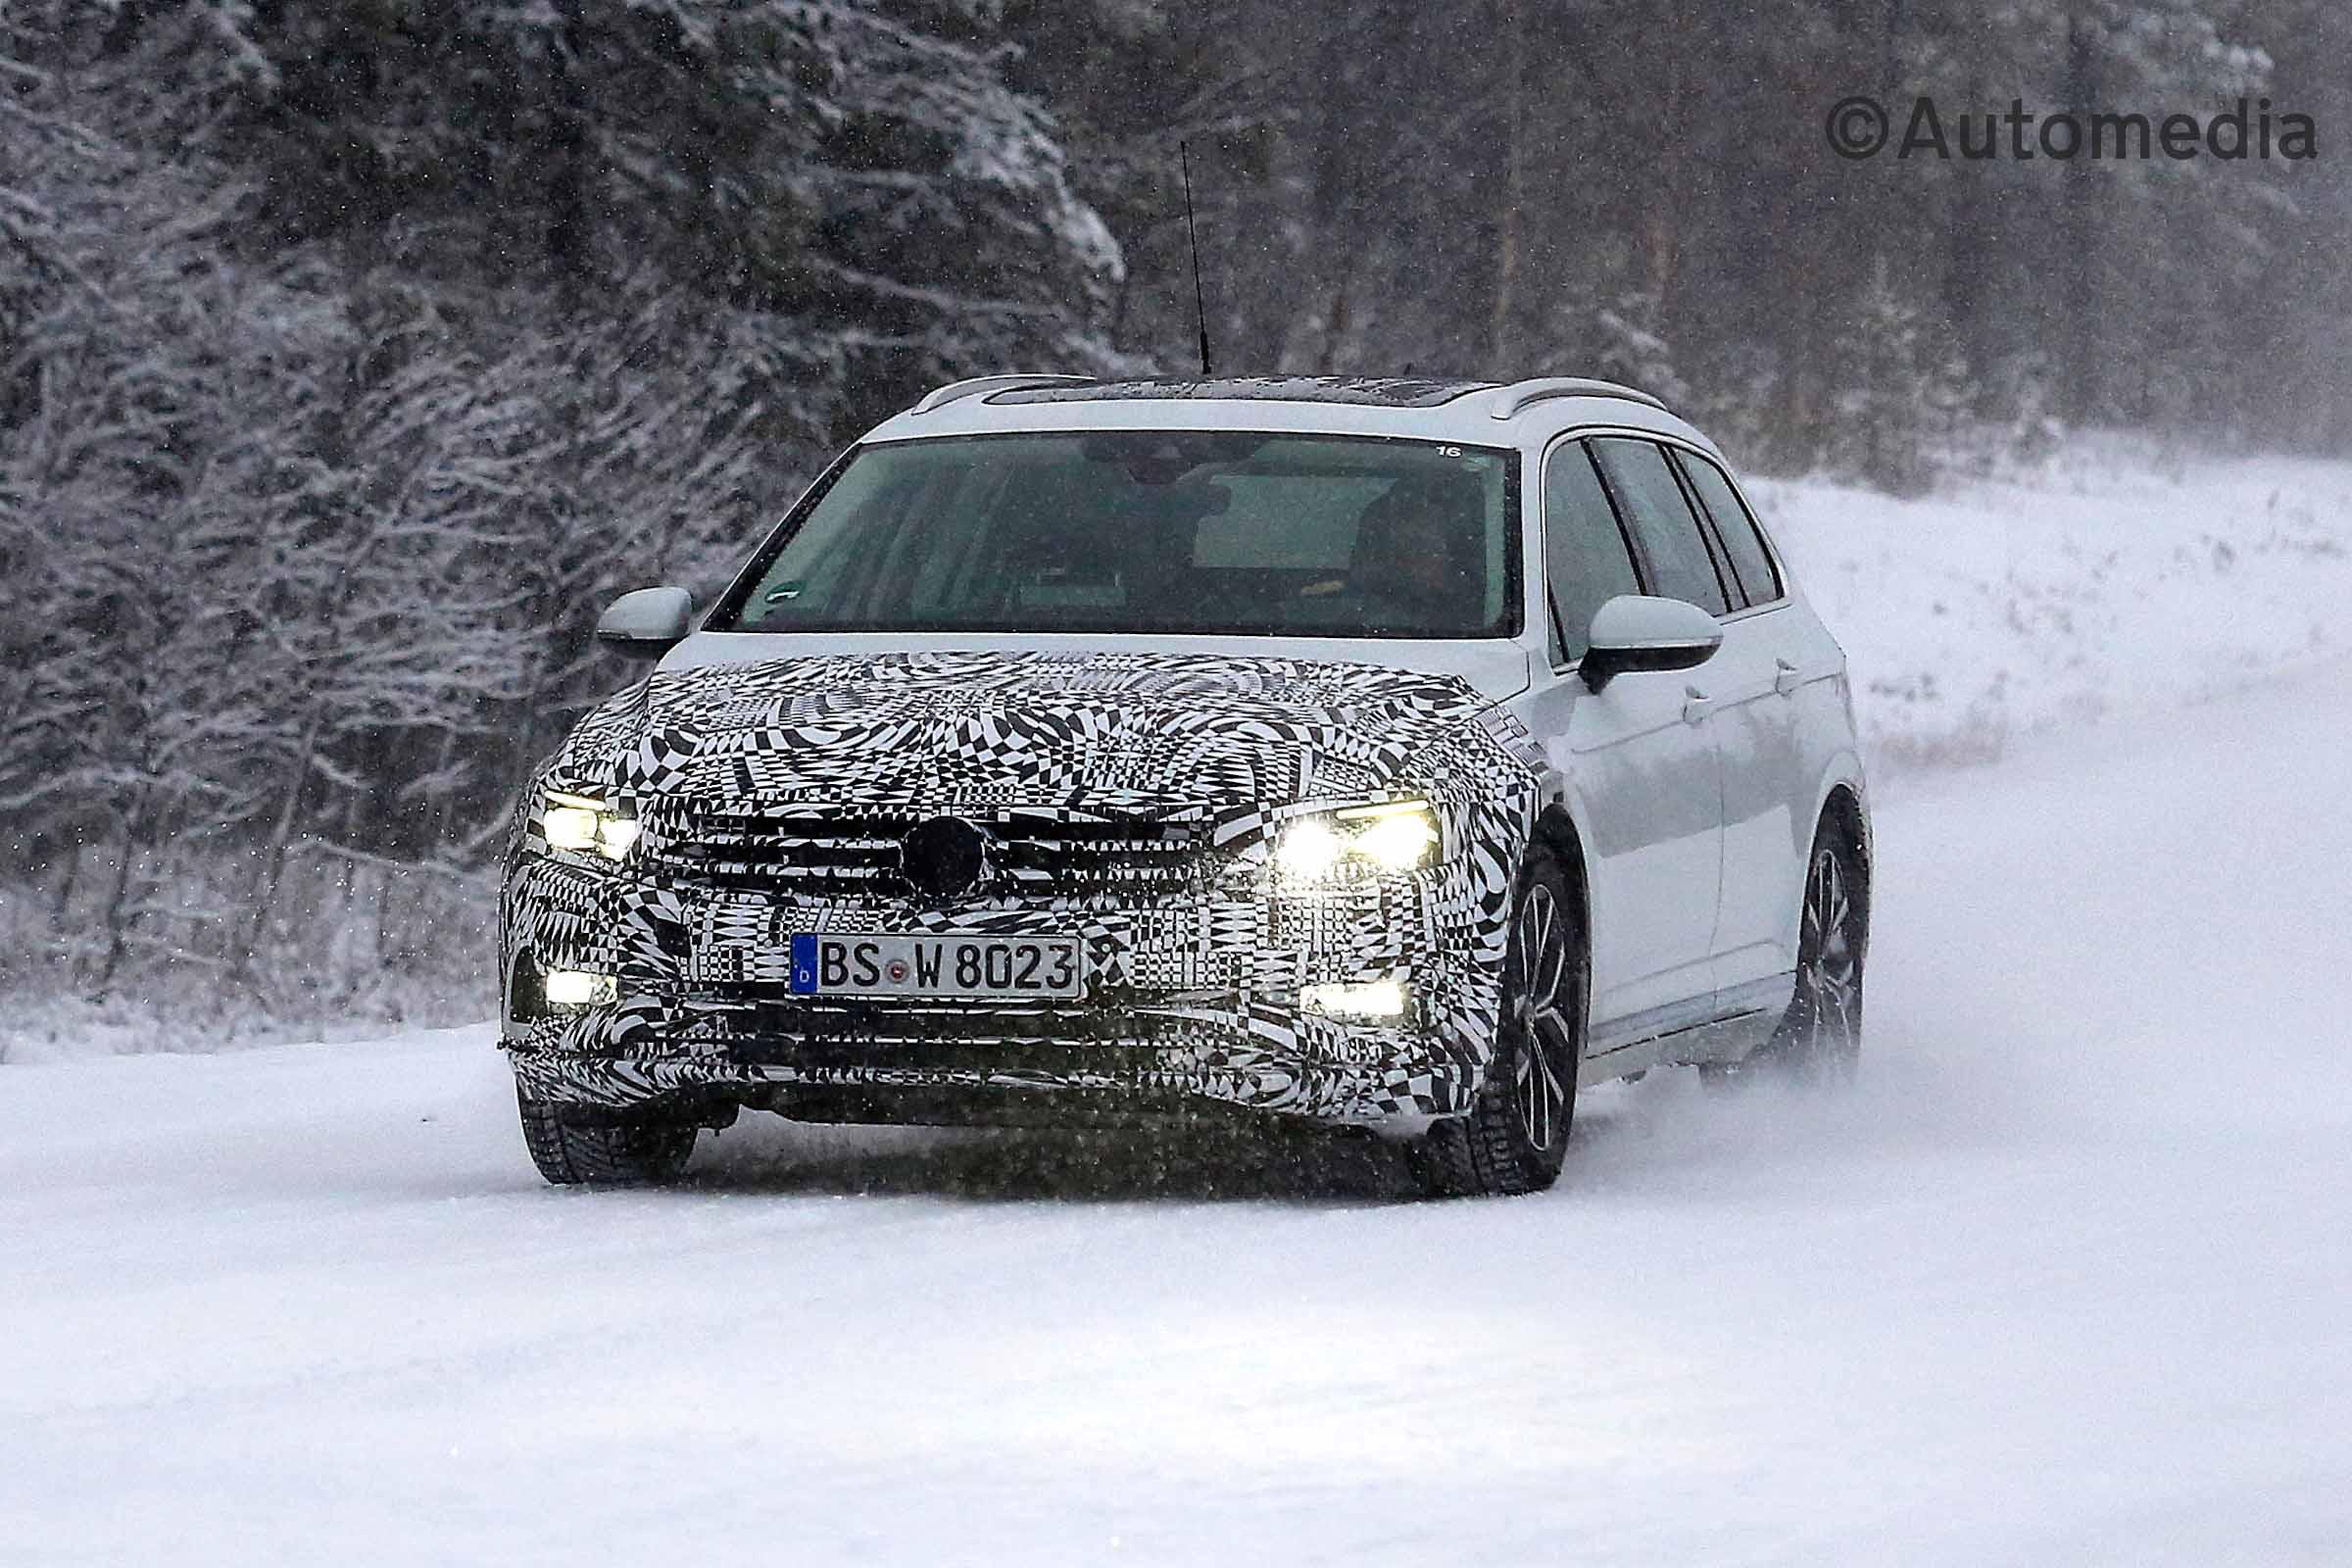 New Volkswagen Passat 2019: Picture, Details And On Sale Date